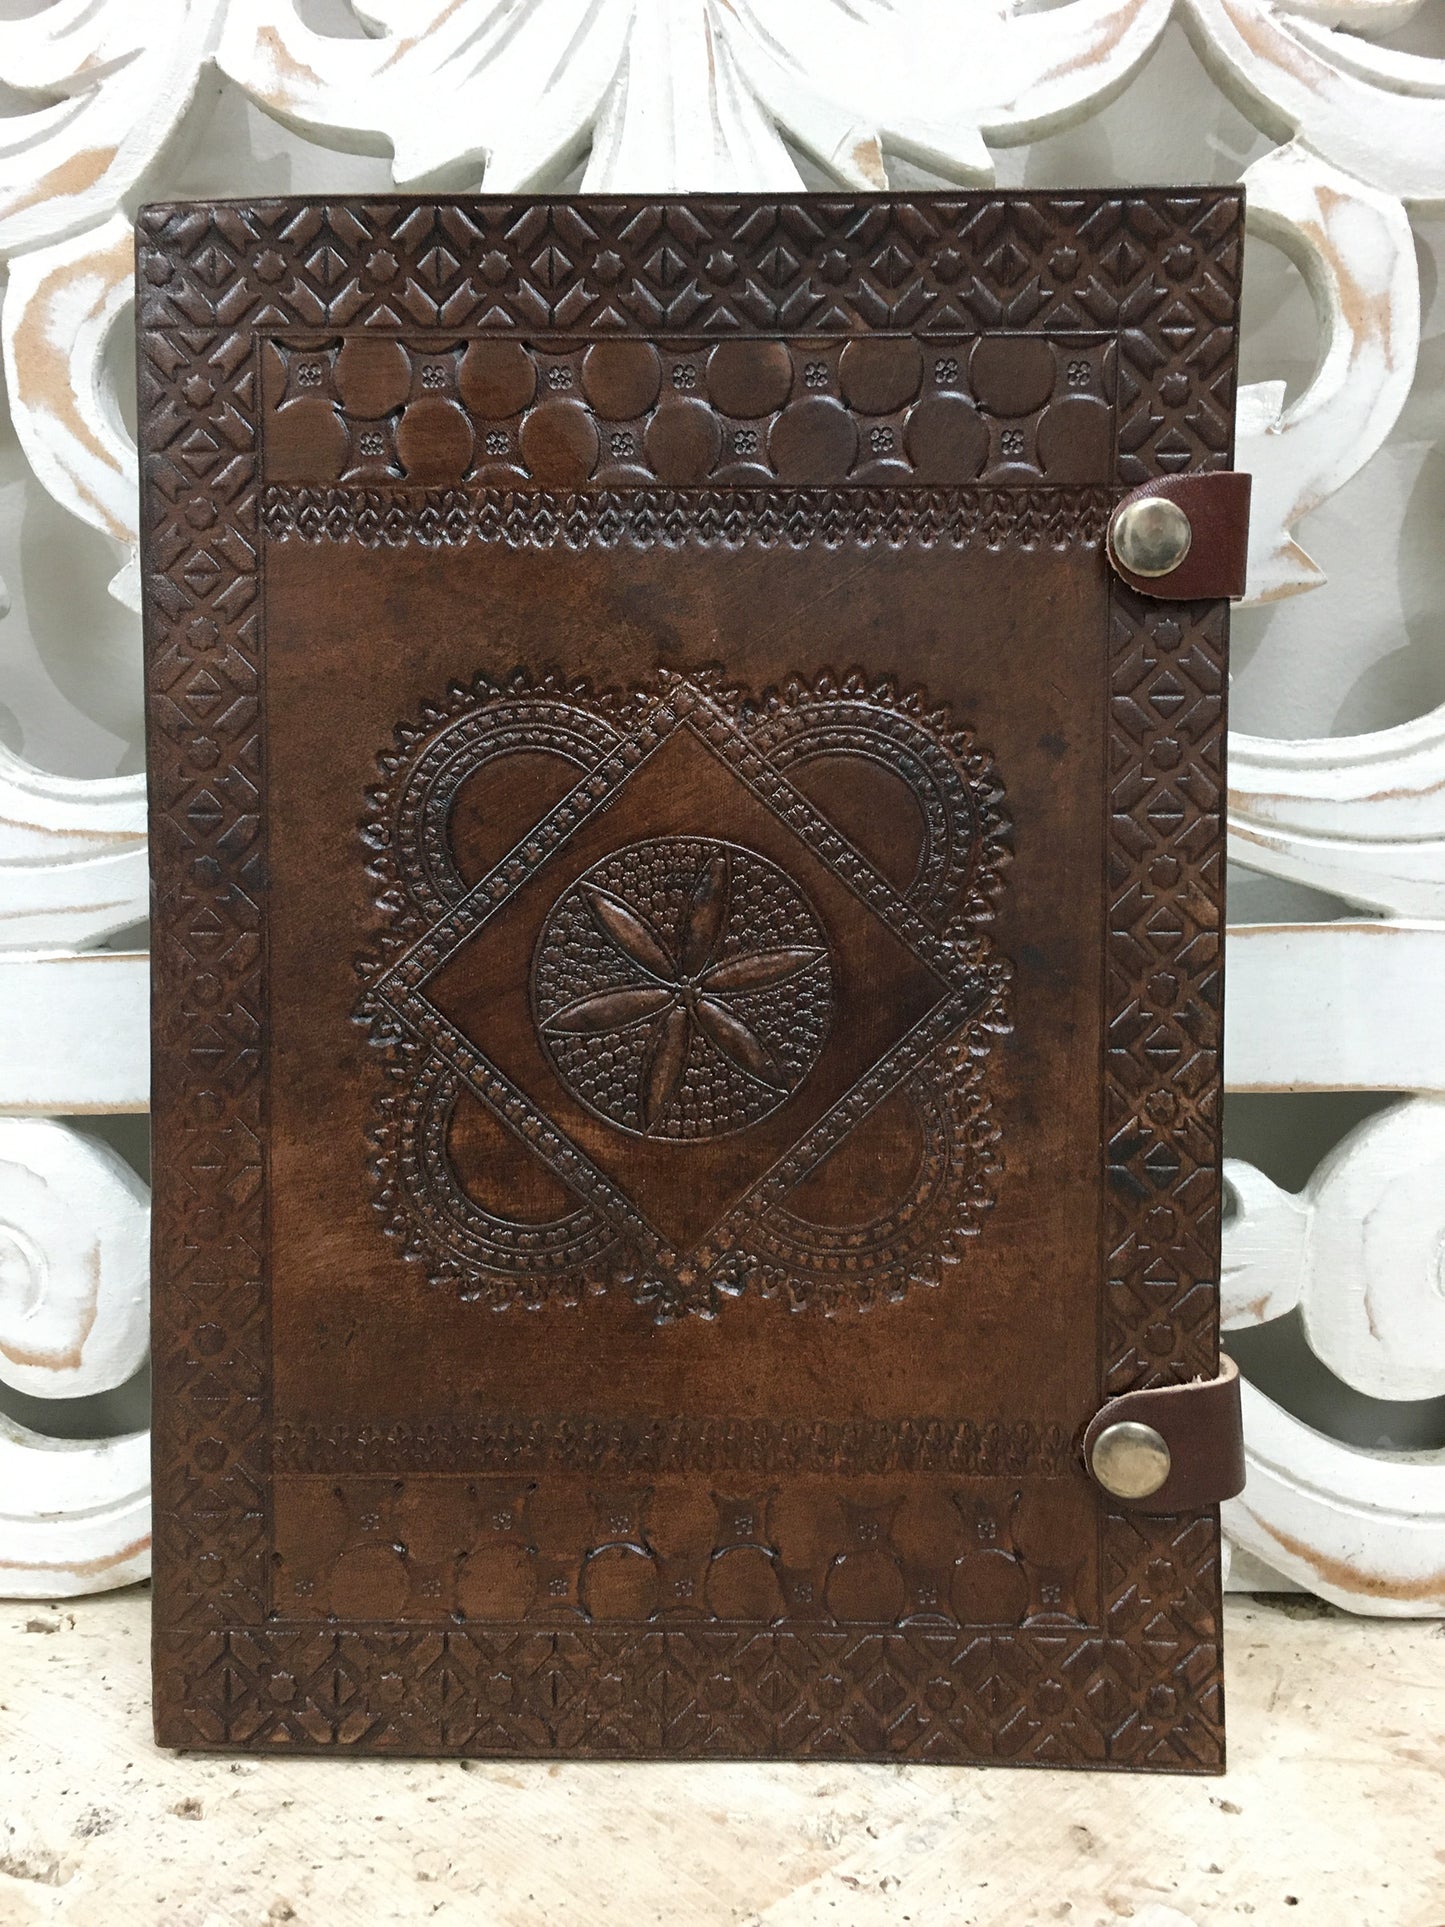 Hand Embossed Camel leather Journal with Button Clasp - 10" x 7" x 1"